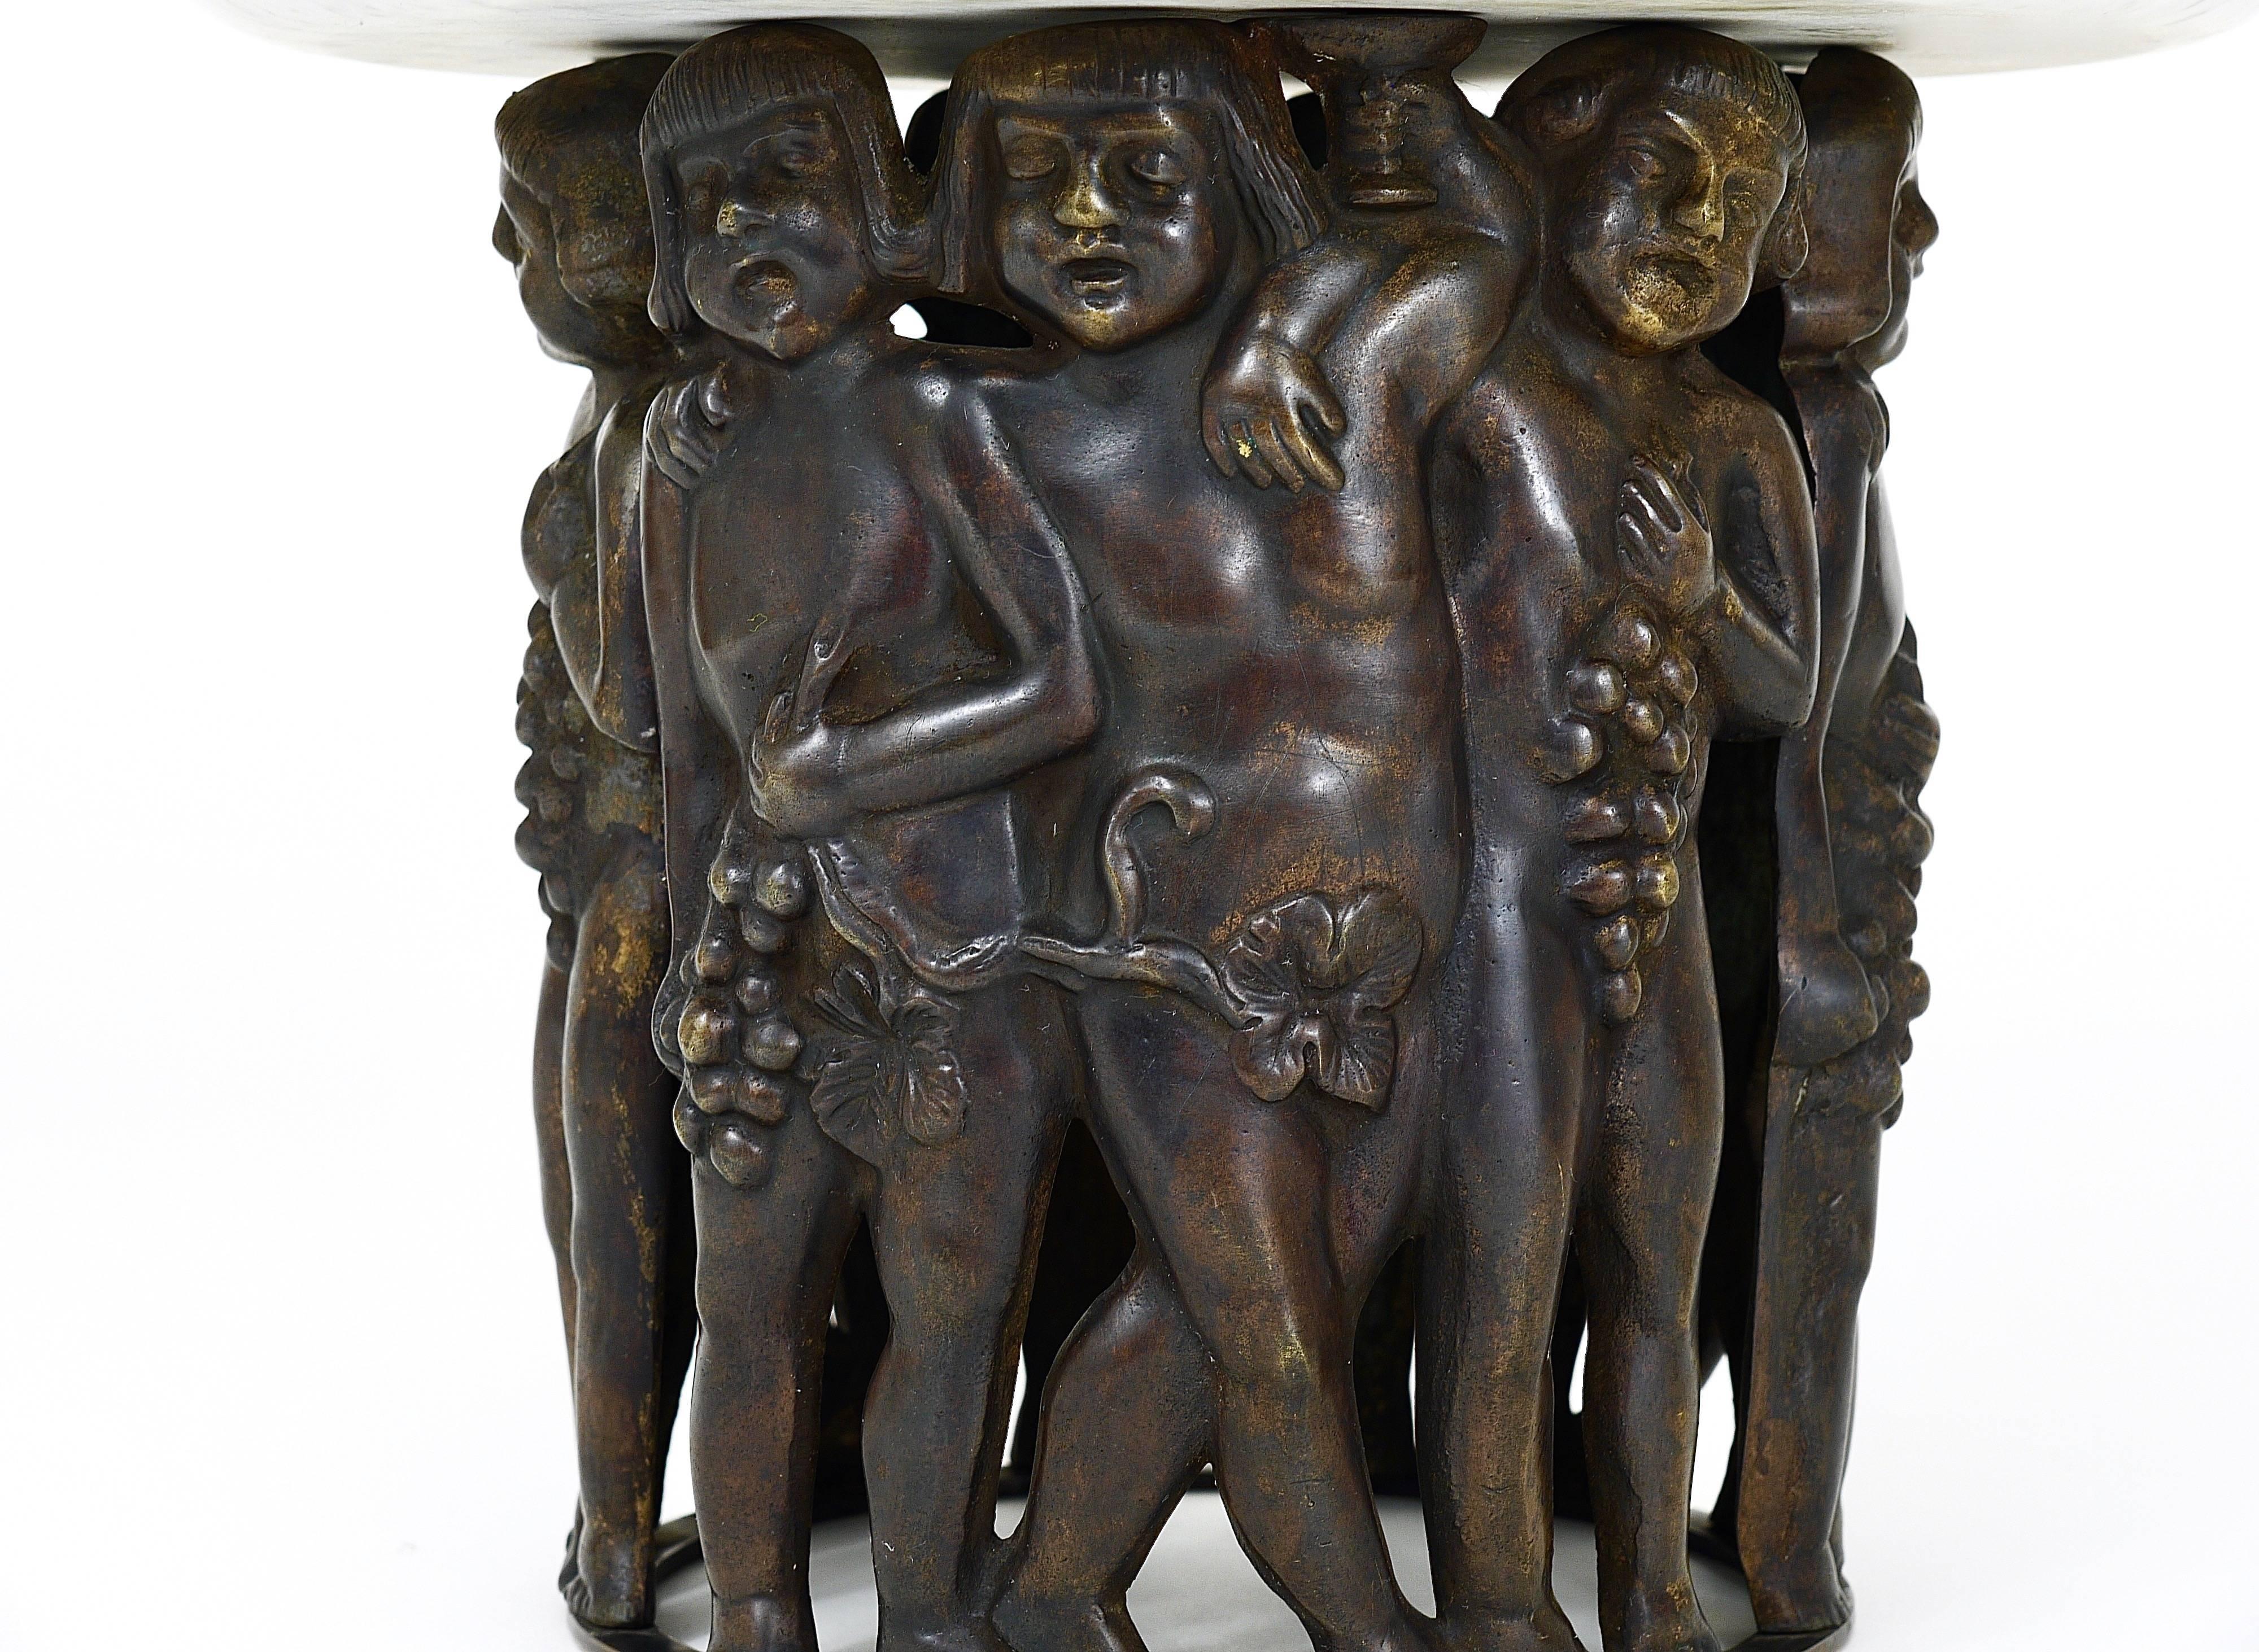 A delightful Art Nouveau sculptural centrepiece, executed in the 1920s in Austria. Made of patinated bronze, displaying boys with wine grapes with a marble top. Attributed to Gustav Gurschner. In very good condition.